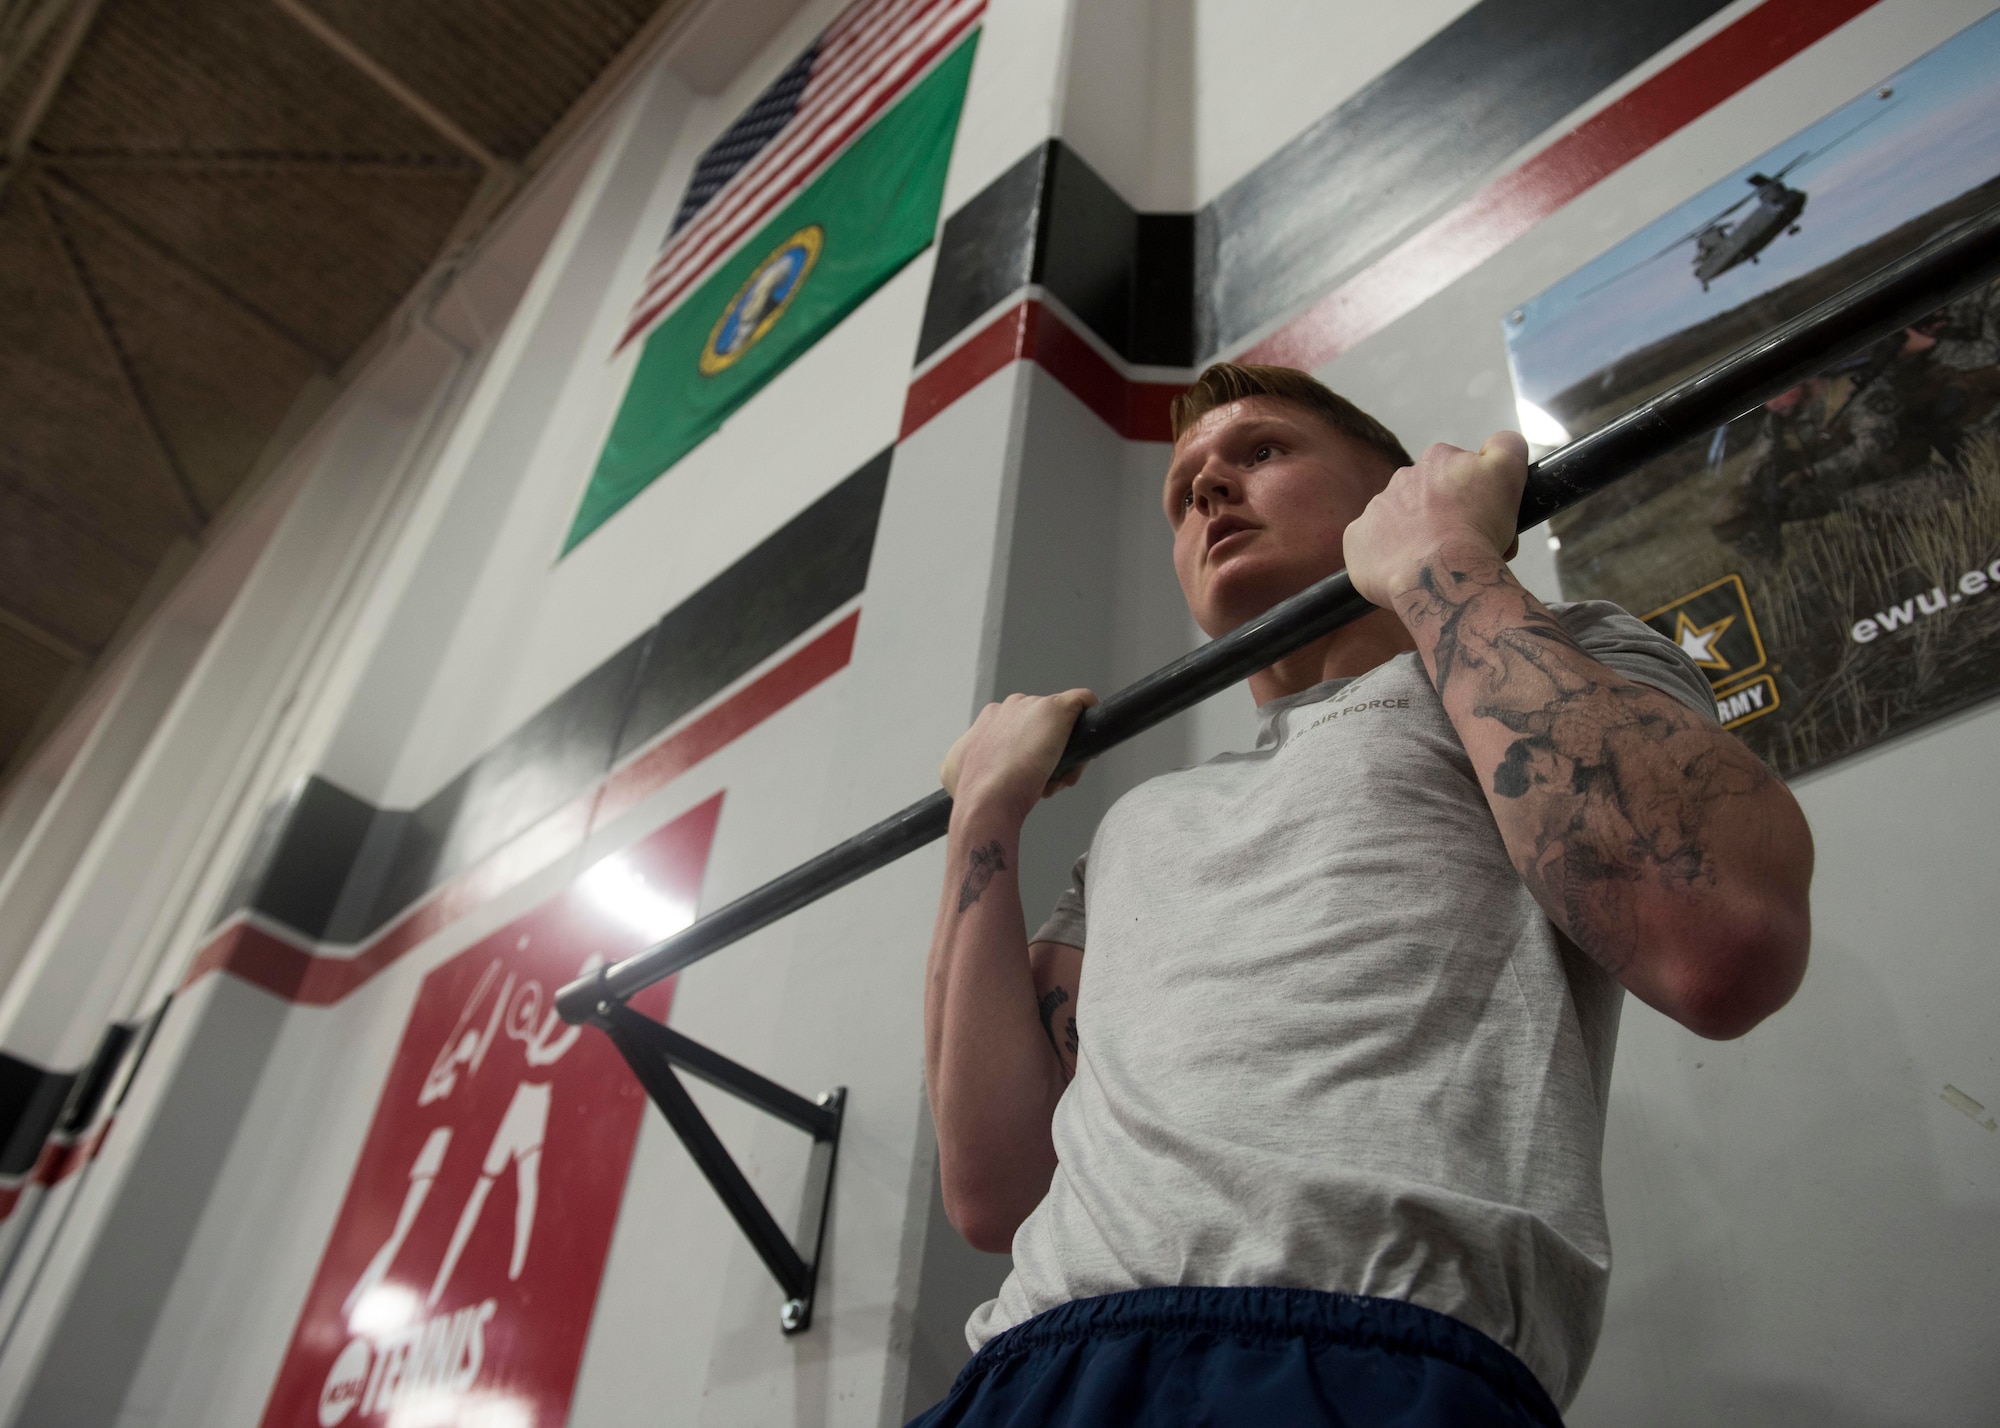 U.S. Air Force Airman 1st Class Tyler Corter, 92nd Medical Operations Squadron medical technician, performs the flexed-arm hang as part of the German Armed Proficiency Badge competition Nov. 17, 2018, at Eastern Washington University in Cheney, Washington. Participants must complete a variety of events covering both basic fitness and military training in order to earn the badge. Events included a sprint test, chin-up test, 1,000-meter run, 100 meter swim in uniform, removing the uniform in water, first-aid, Nuclear Biological Chemical Mission Oriented Protective Posture test, pistol qualification and a ruck-march. (U.S. Air Force photo/Airman 1st Class Lawrence Sena)